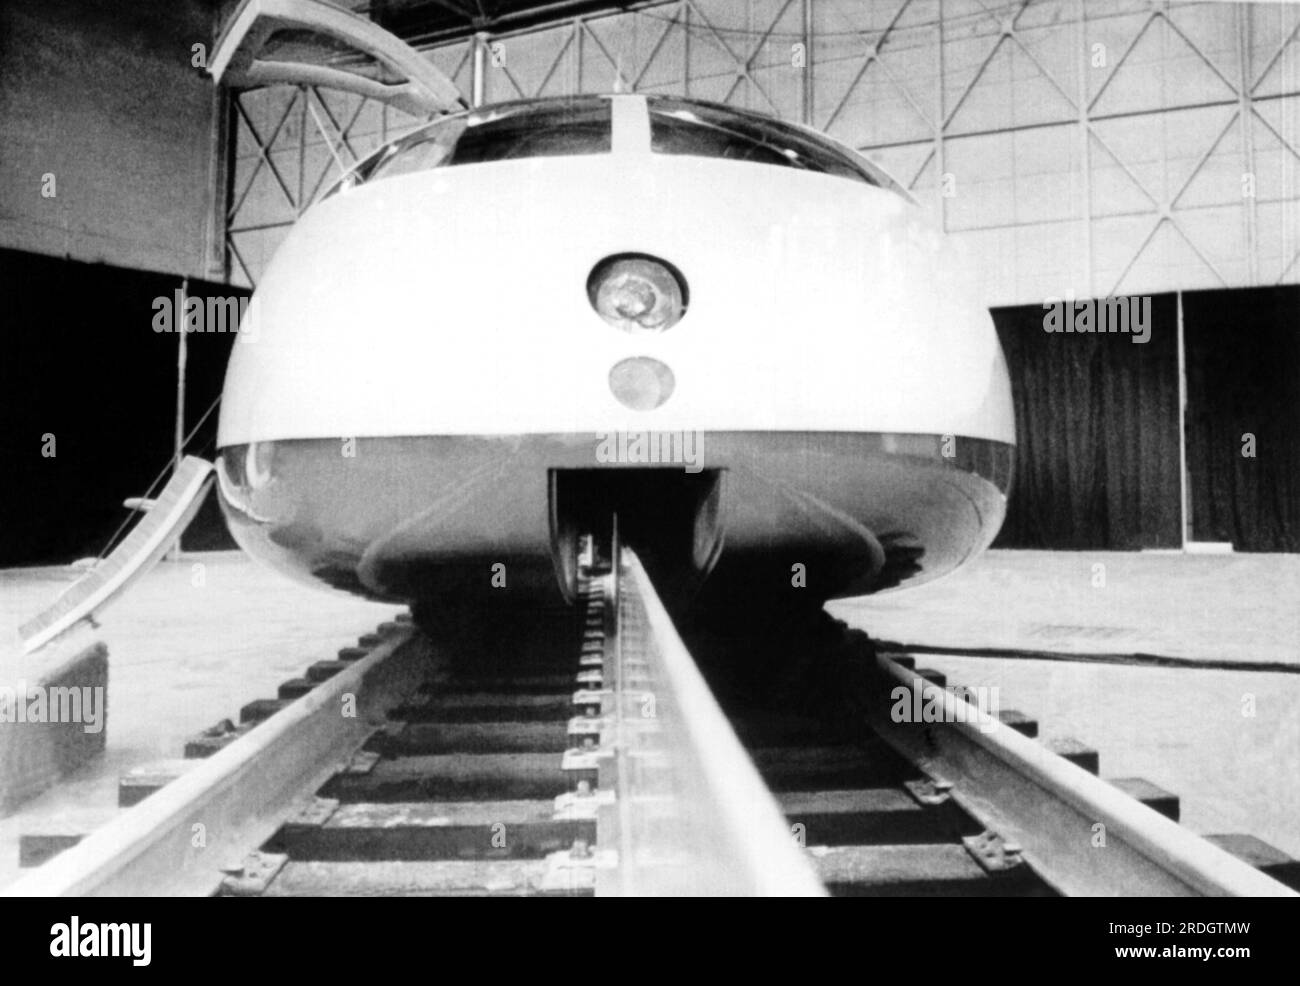 Los Angeles, California:  December 9, 1969 An ultra-streamlined test train built by the Garrett Corporation for the U.S. Dept. of Transportation. It is powered by a linear induction motor which is seen between the two coventional tracks and is designed to operate at speeds up to 250 mph. Stock Photo